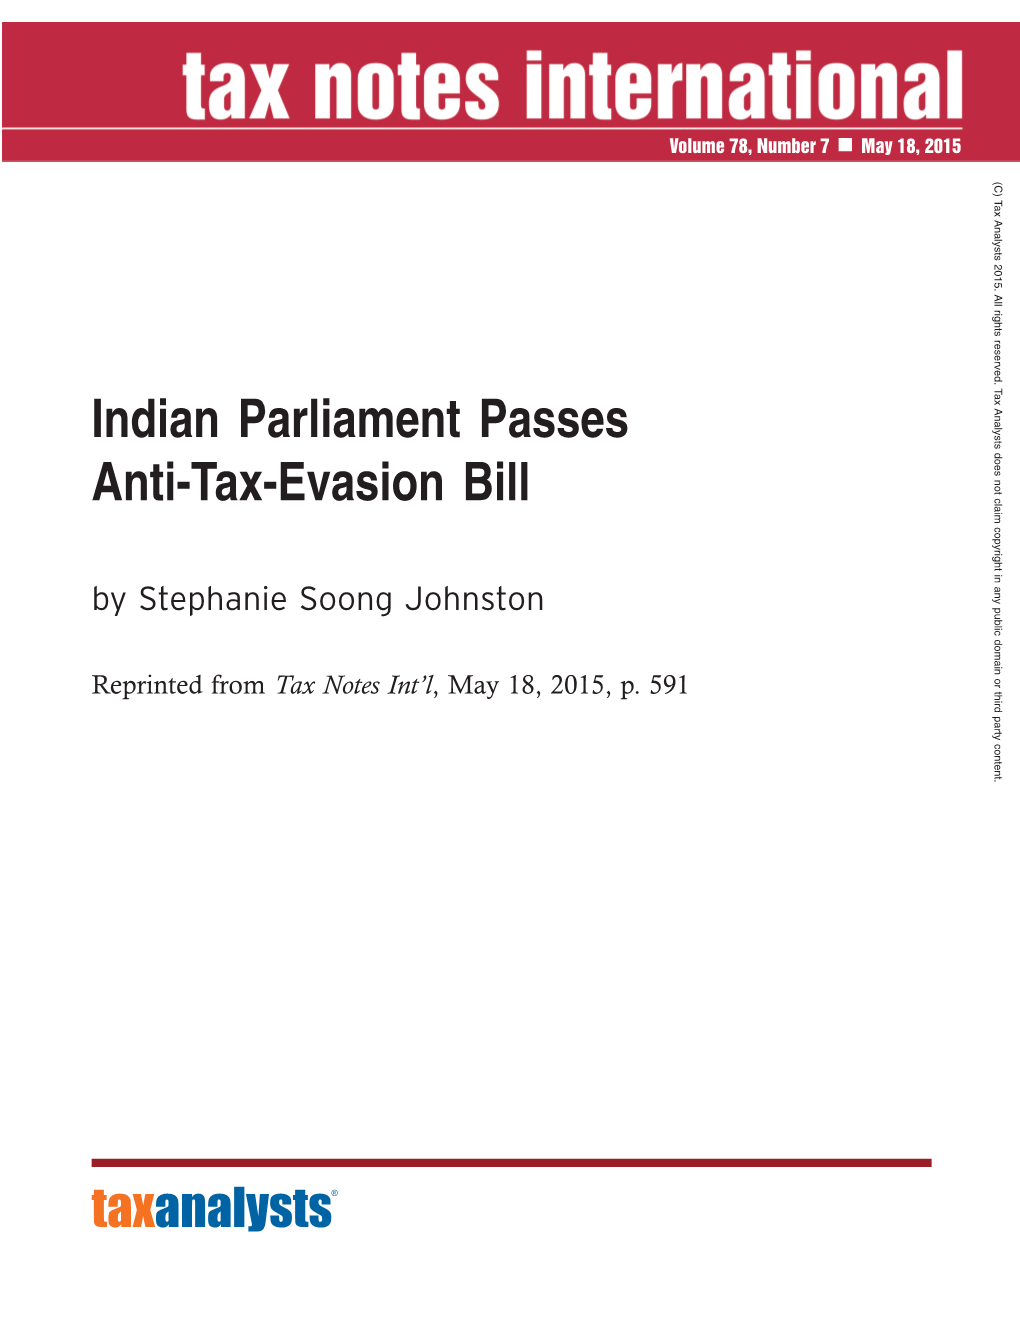 Indian Parliament Passes Anti-Tax-Evasion Bill by Stephanie Soong Johnston